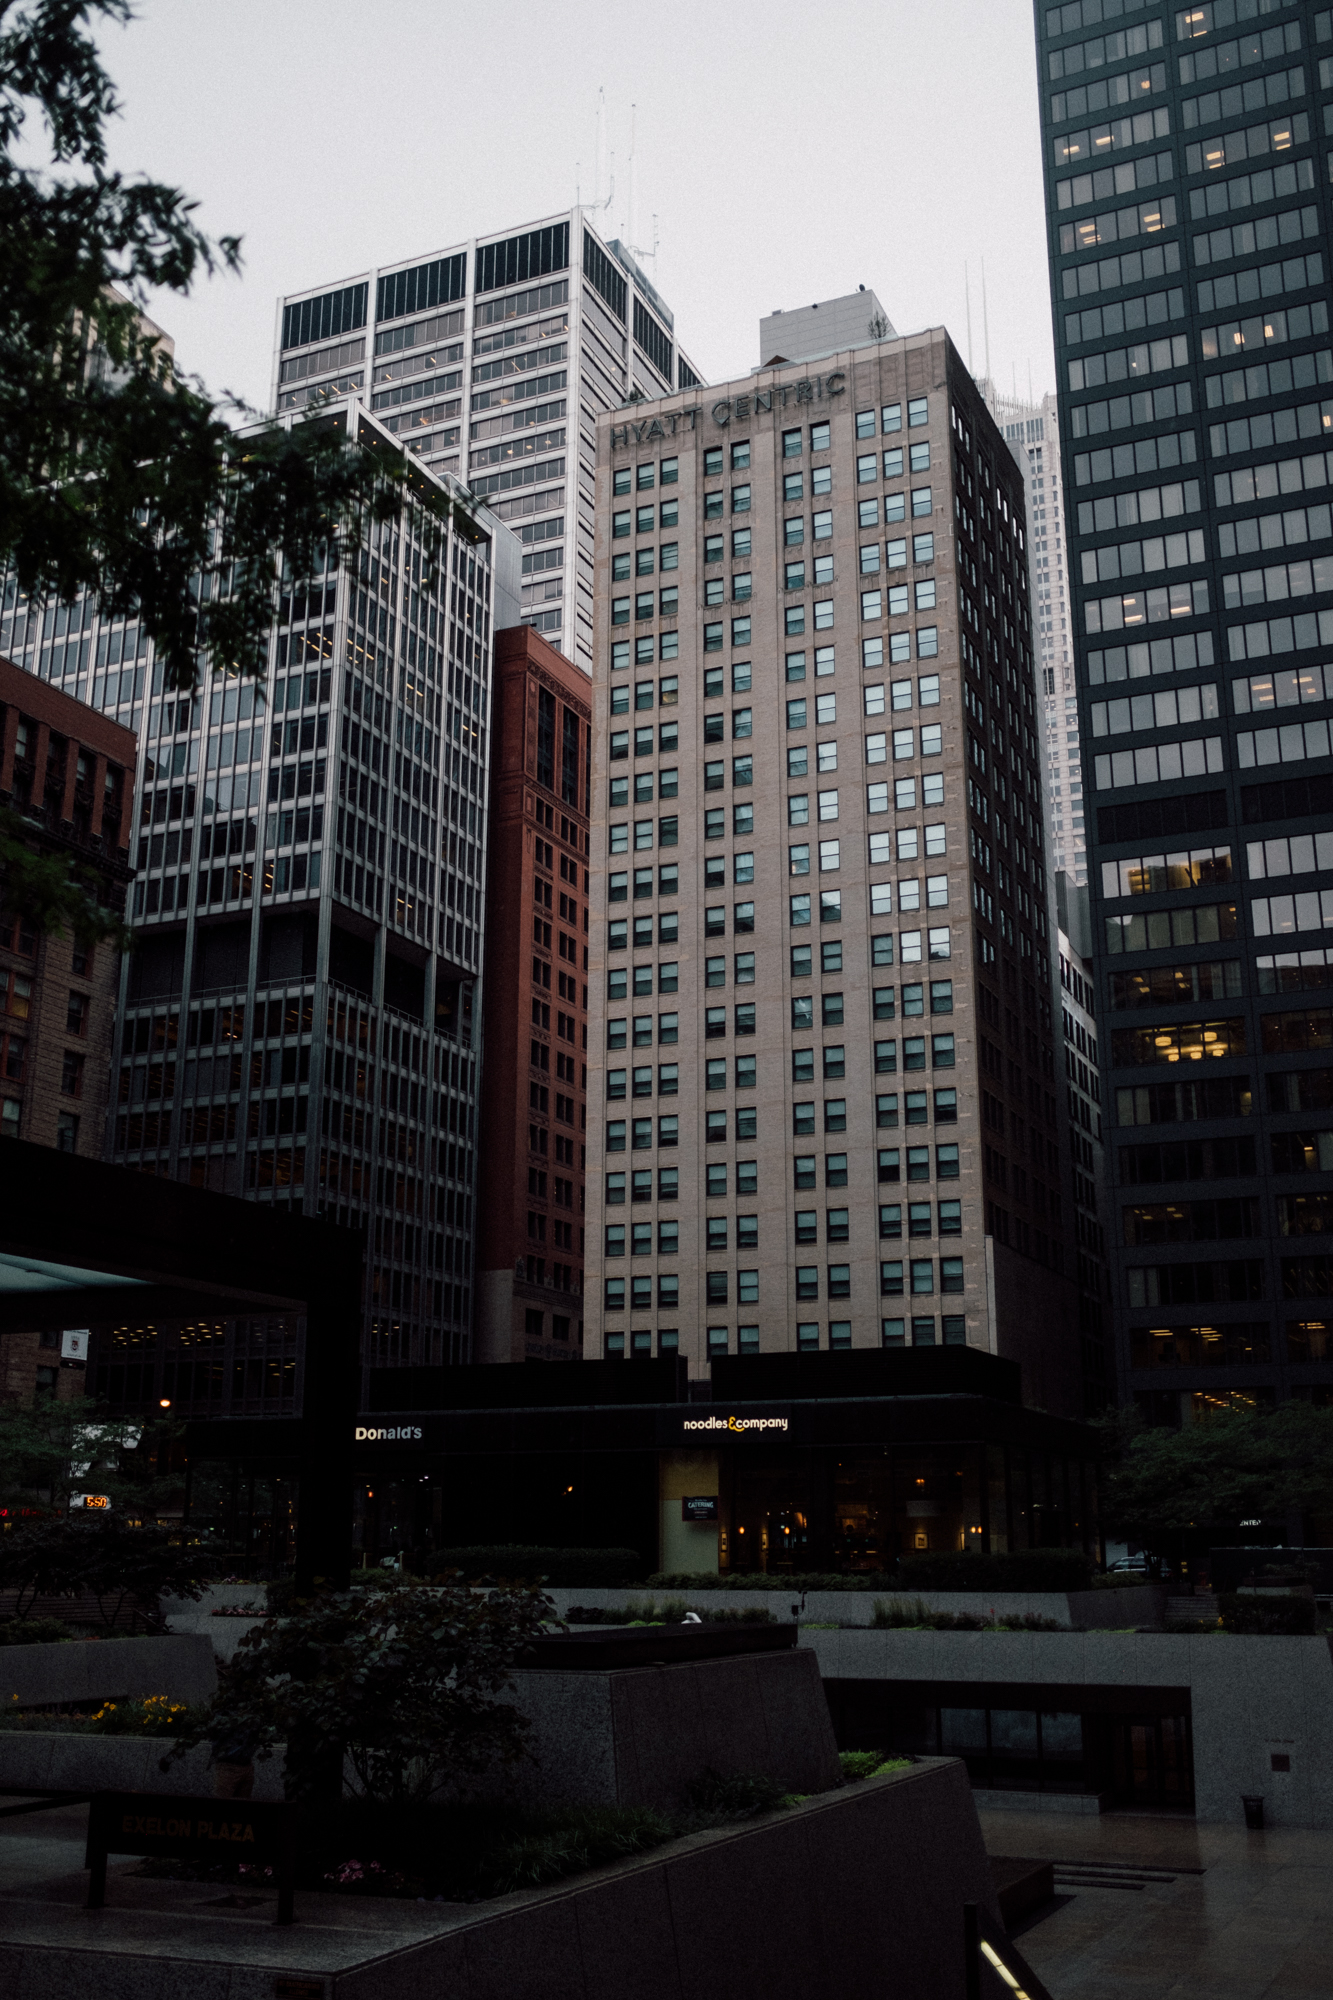 streeterville and chicago (8 of 46).jpg